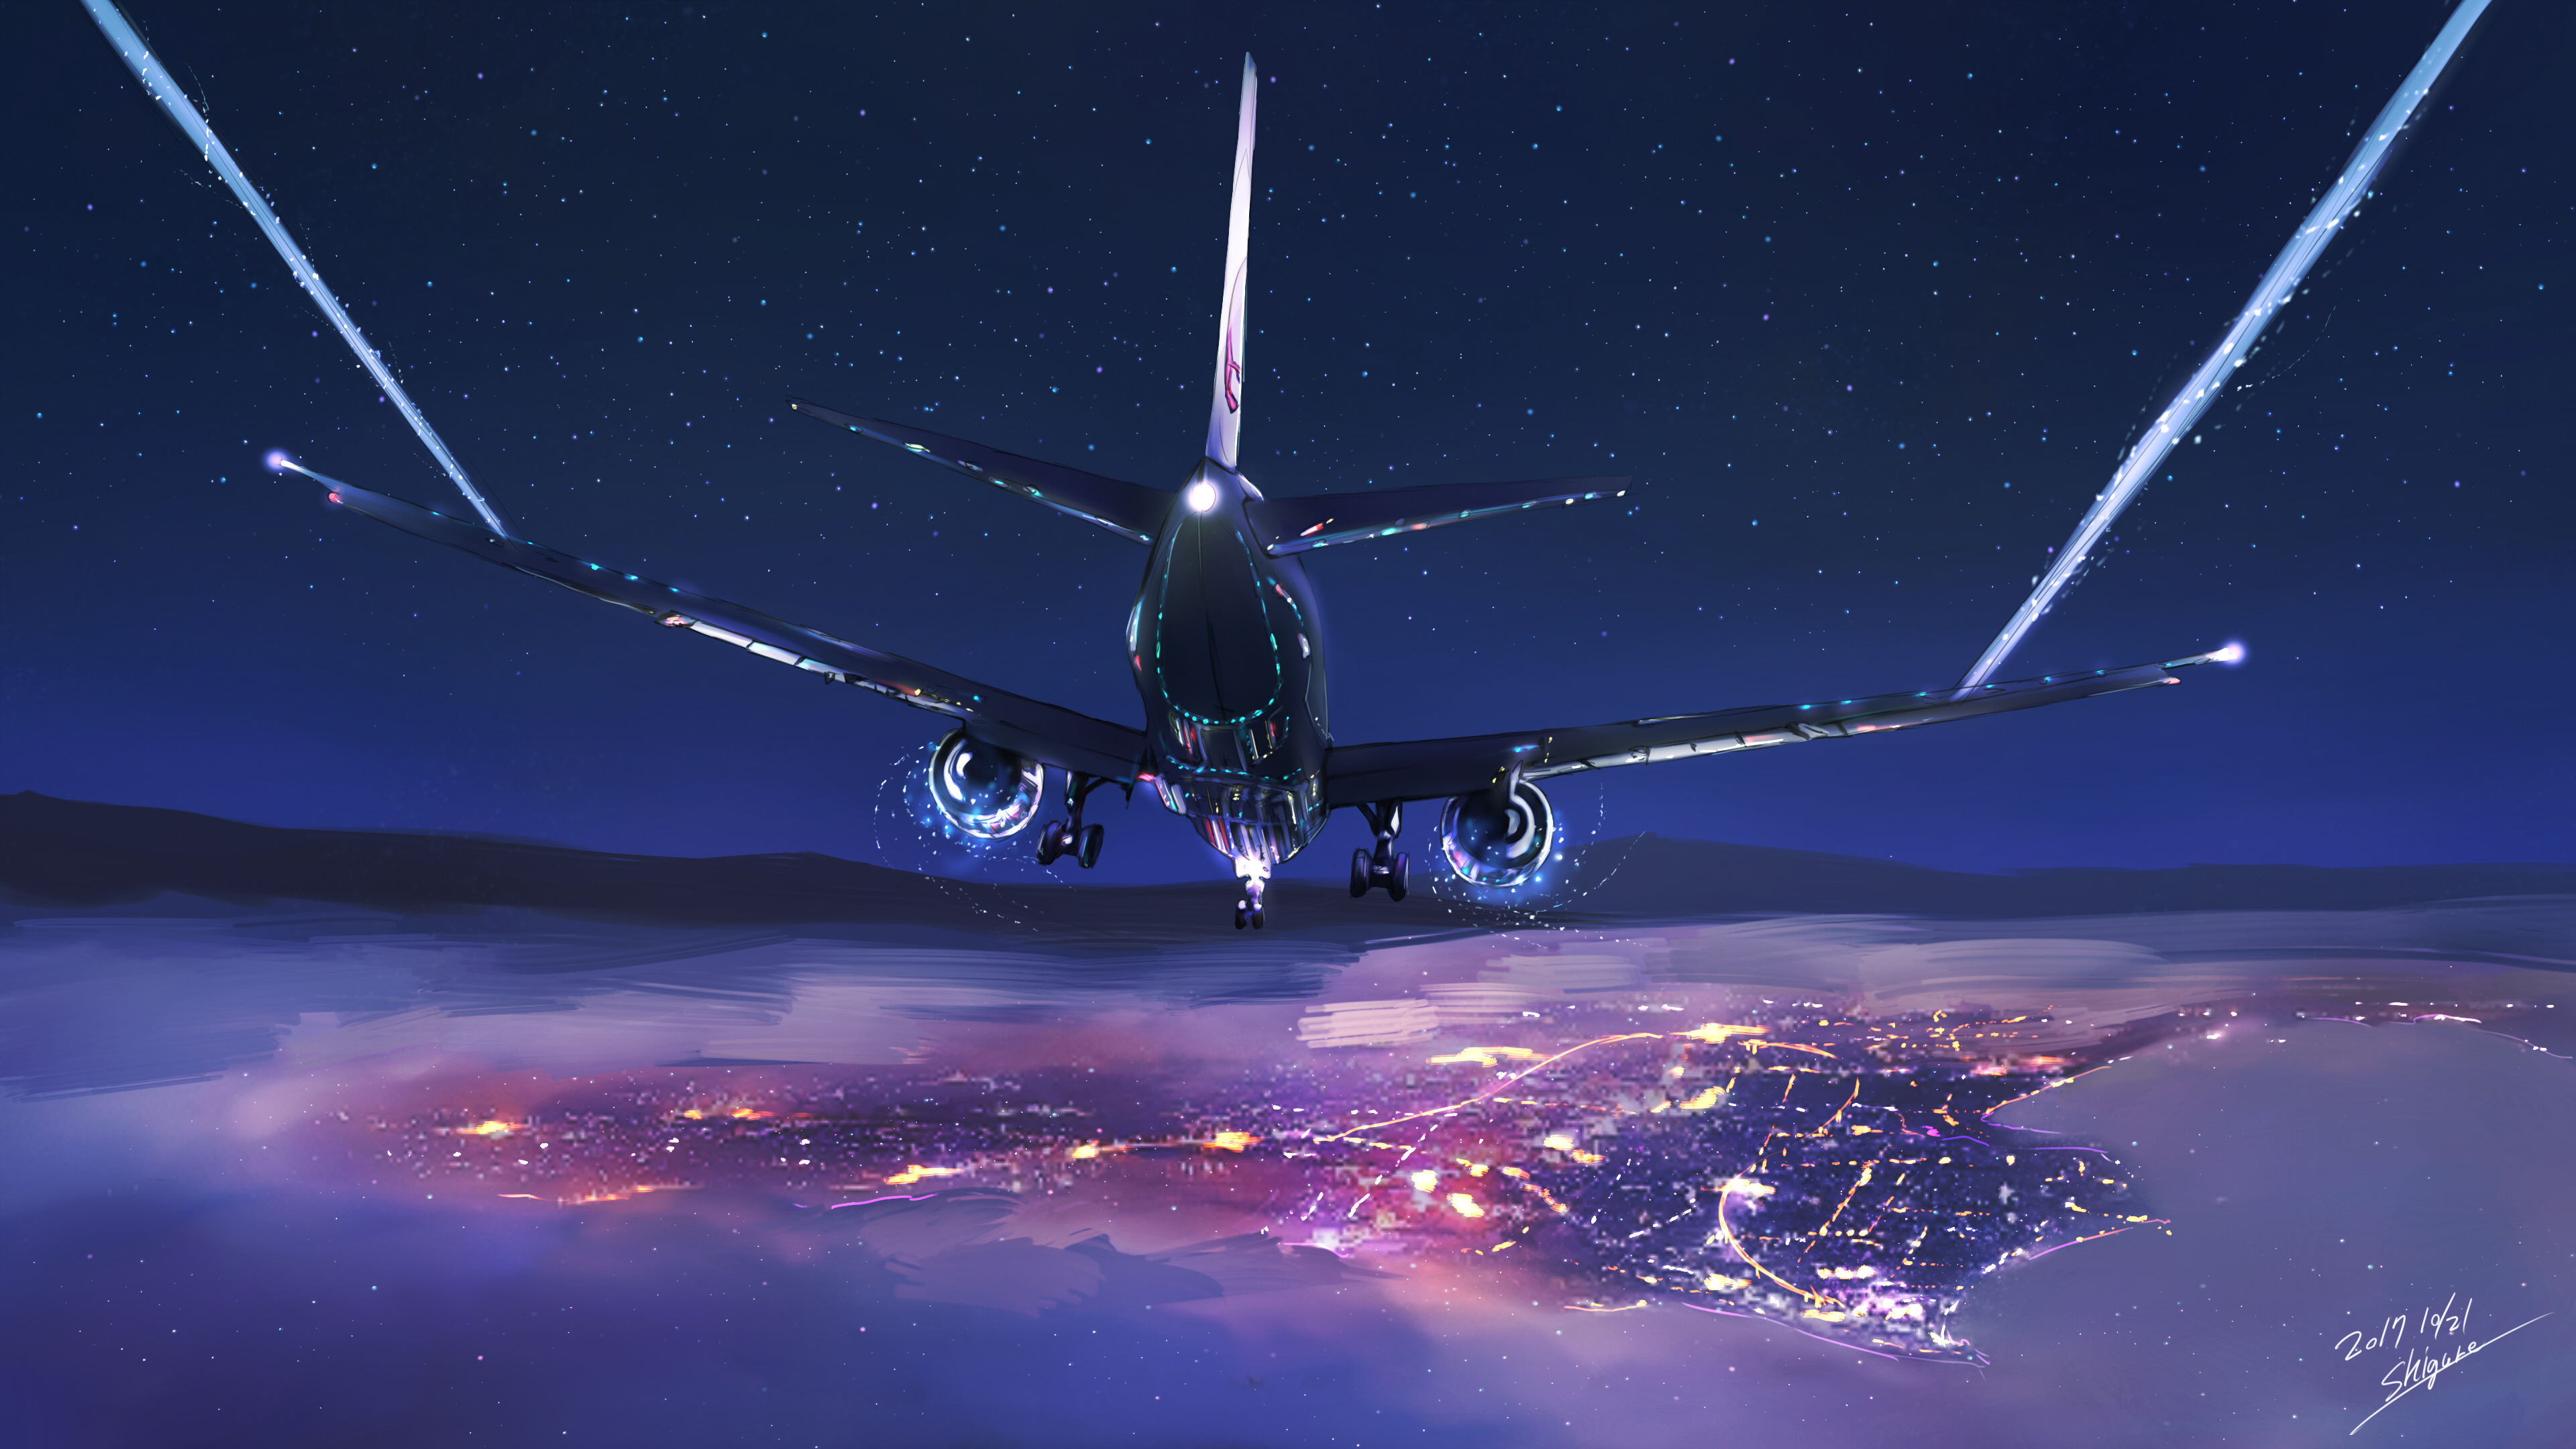 City Clouds Sky Mountains City Lights Stars Night Drawing Digital Art Airplane Airbus Airbus A350 3840x2160